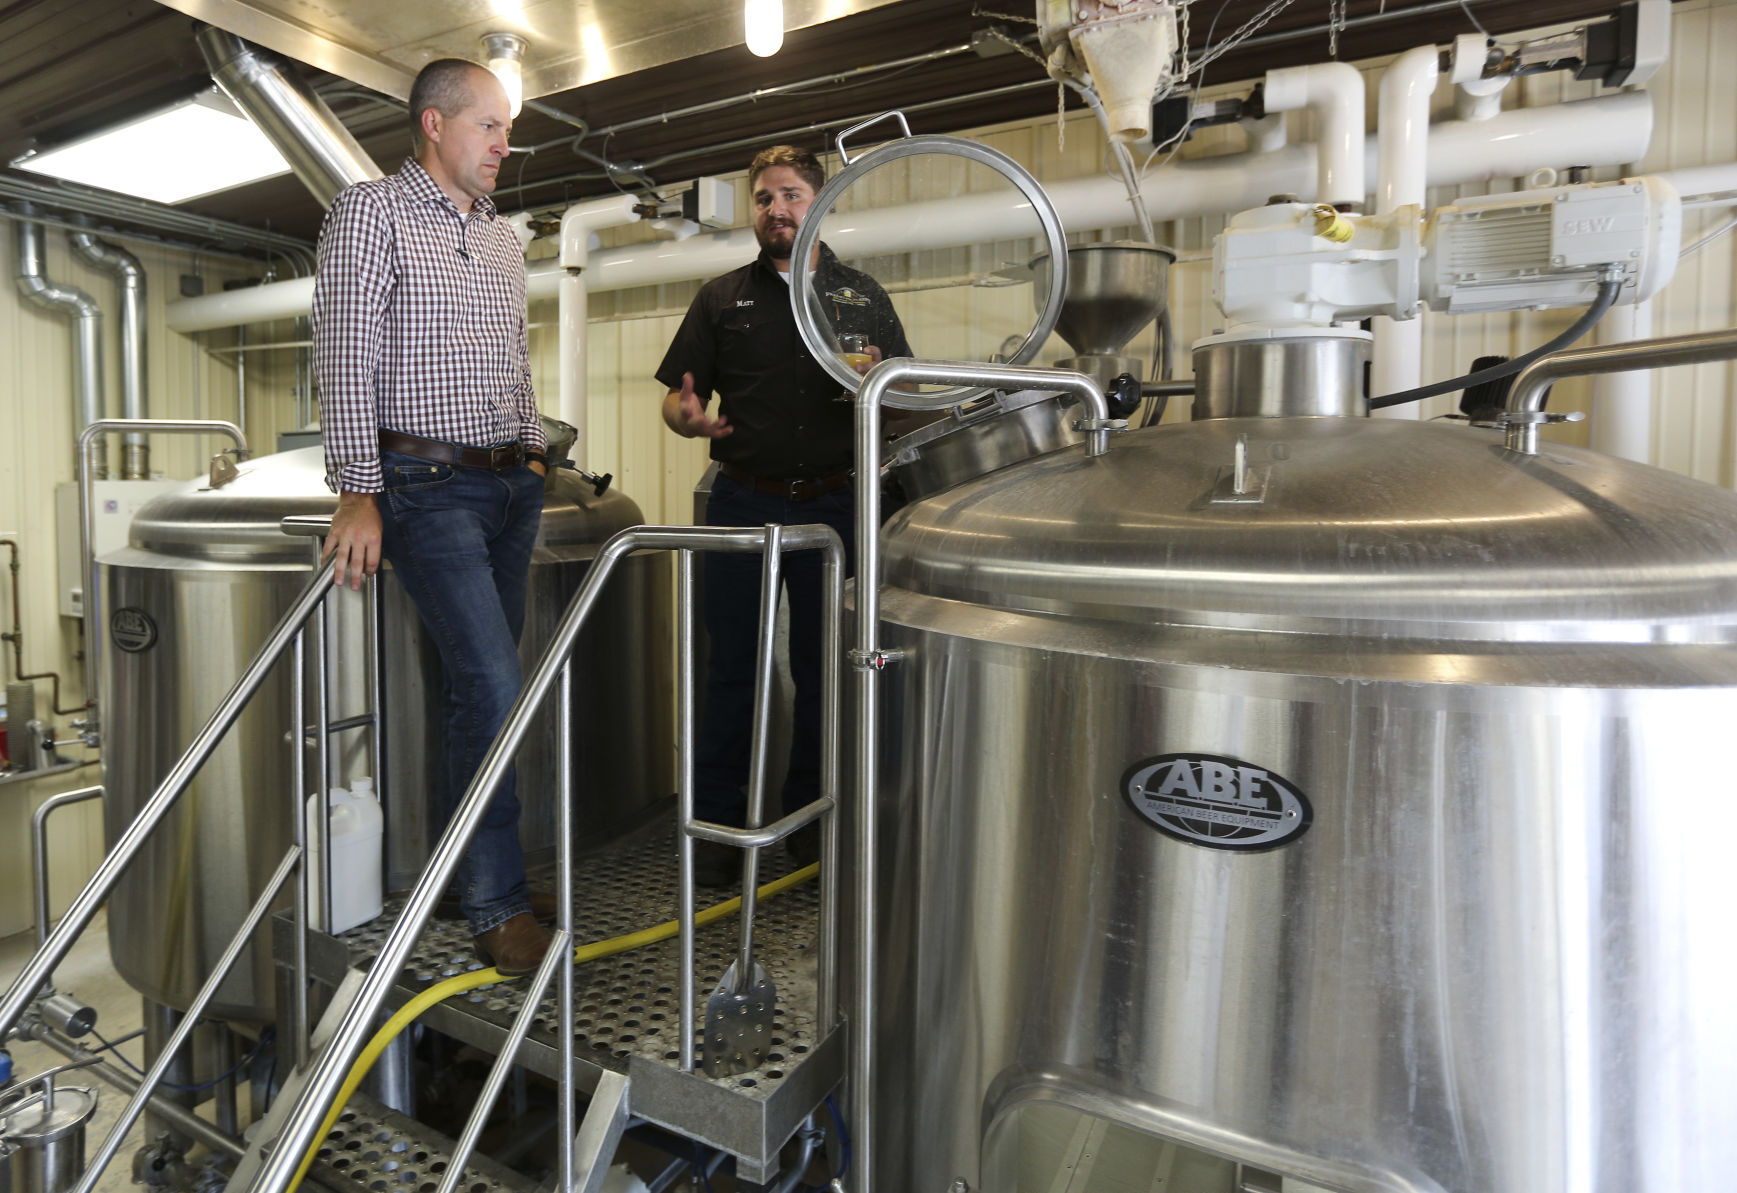 Iowa Secretary of Agriculture Mike Naig (left) listens to Franklin Street Brewing Company brew master, Matt Knutson, explain the brewing process during a tour of the facility located in Manchester, Iowa, on Thursday, Sept. 15, 2022.    PHOTO CREDIT: Dave Kettering